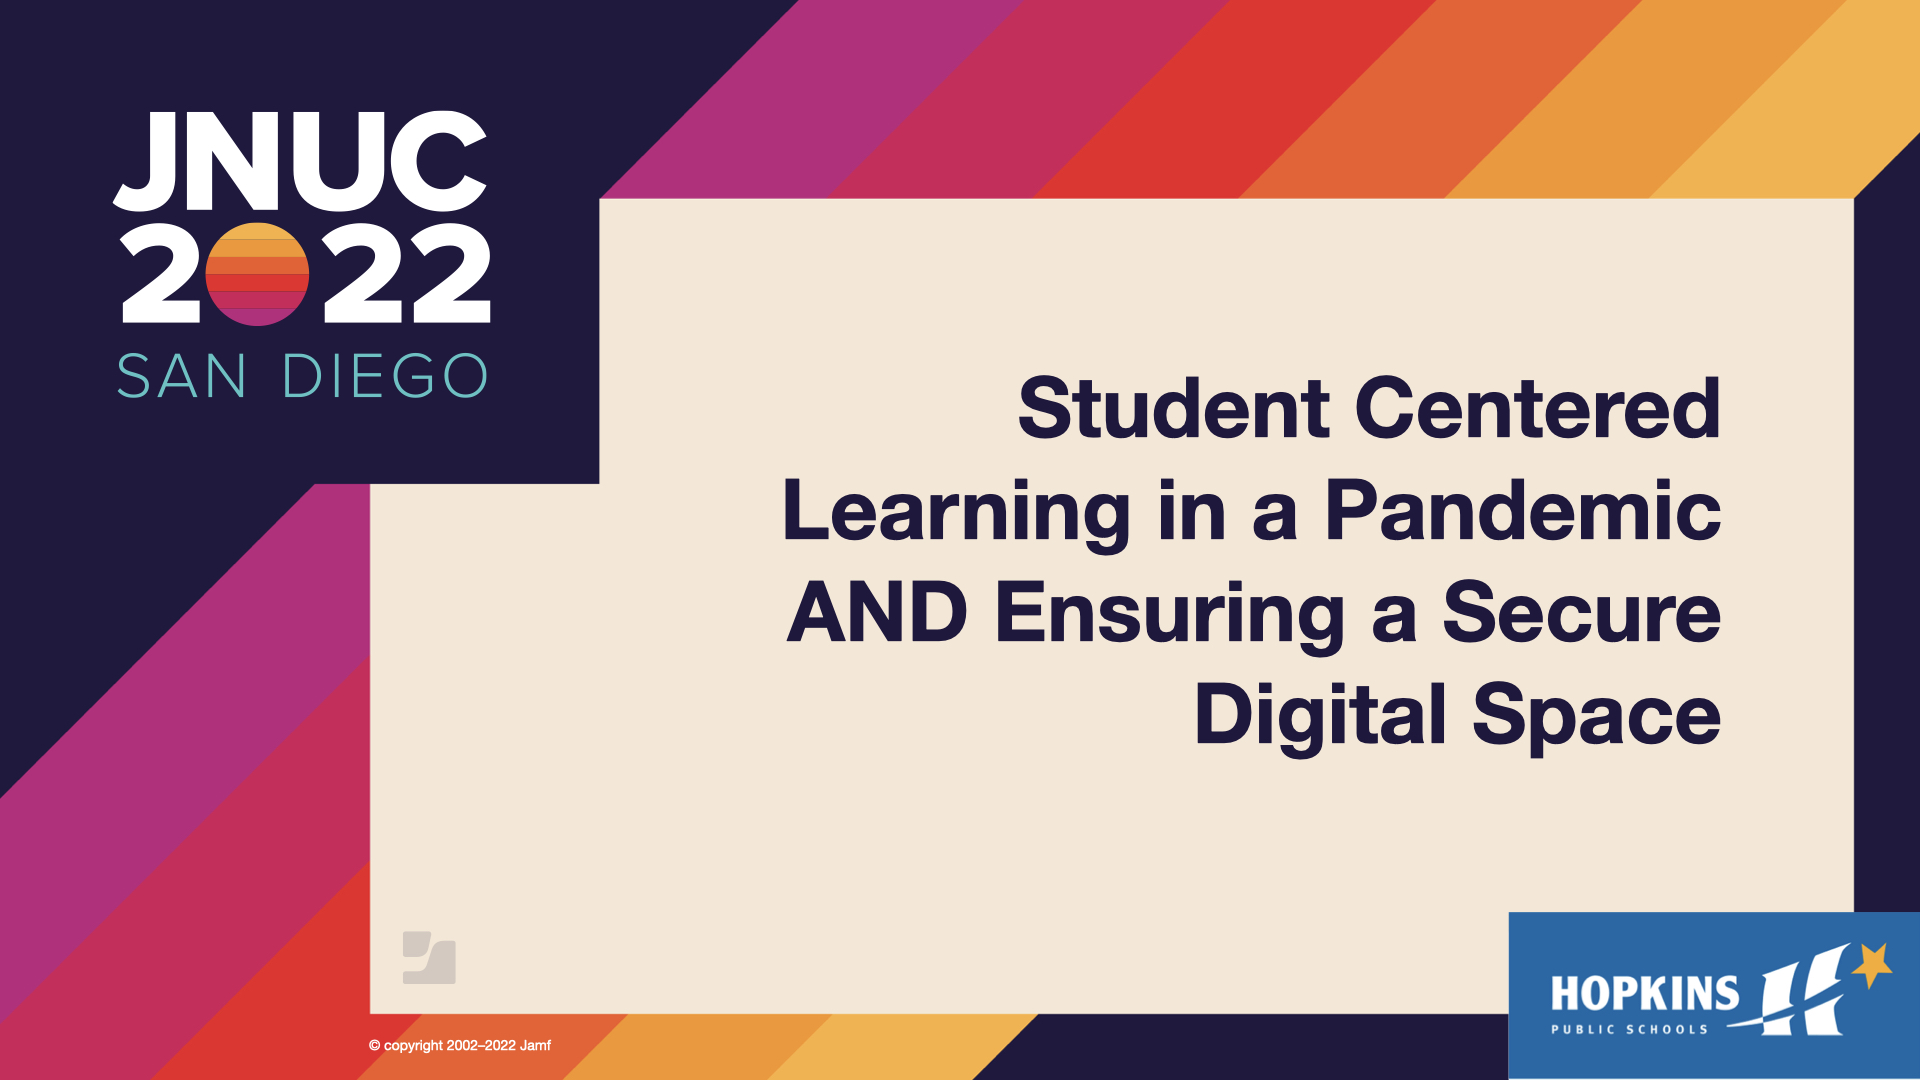 JNUC 2022 session: Student-Centered Learning in a Pandemic AND Ensuring a Secure Digital Space